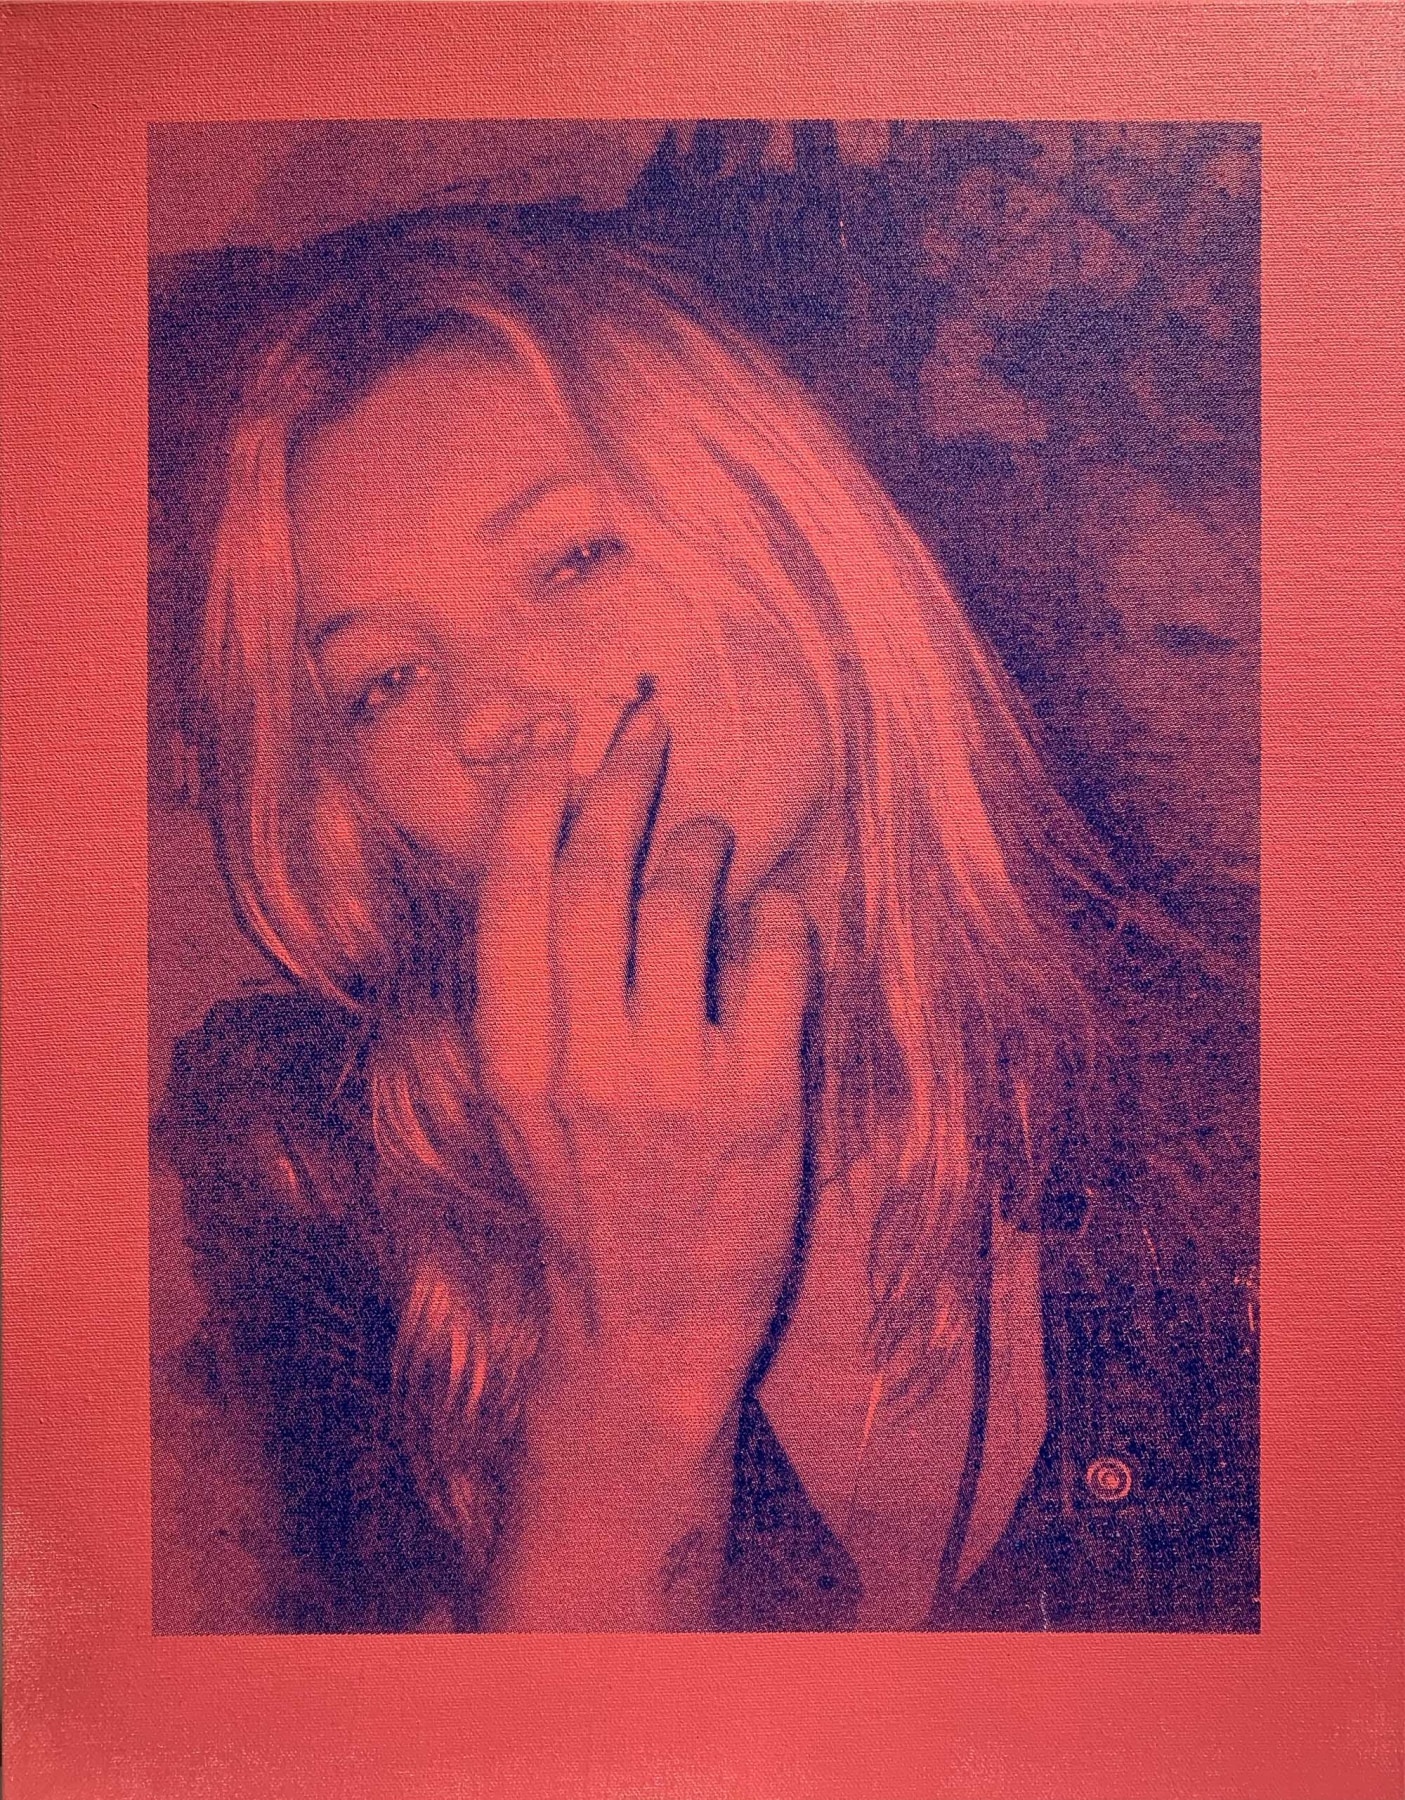 Michael Stiegler  Kate Moss Pink, 2019 art from the exhibition on Bowery at Lone Goat Gallery